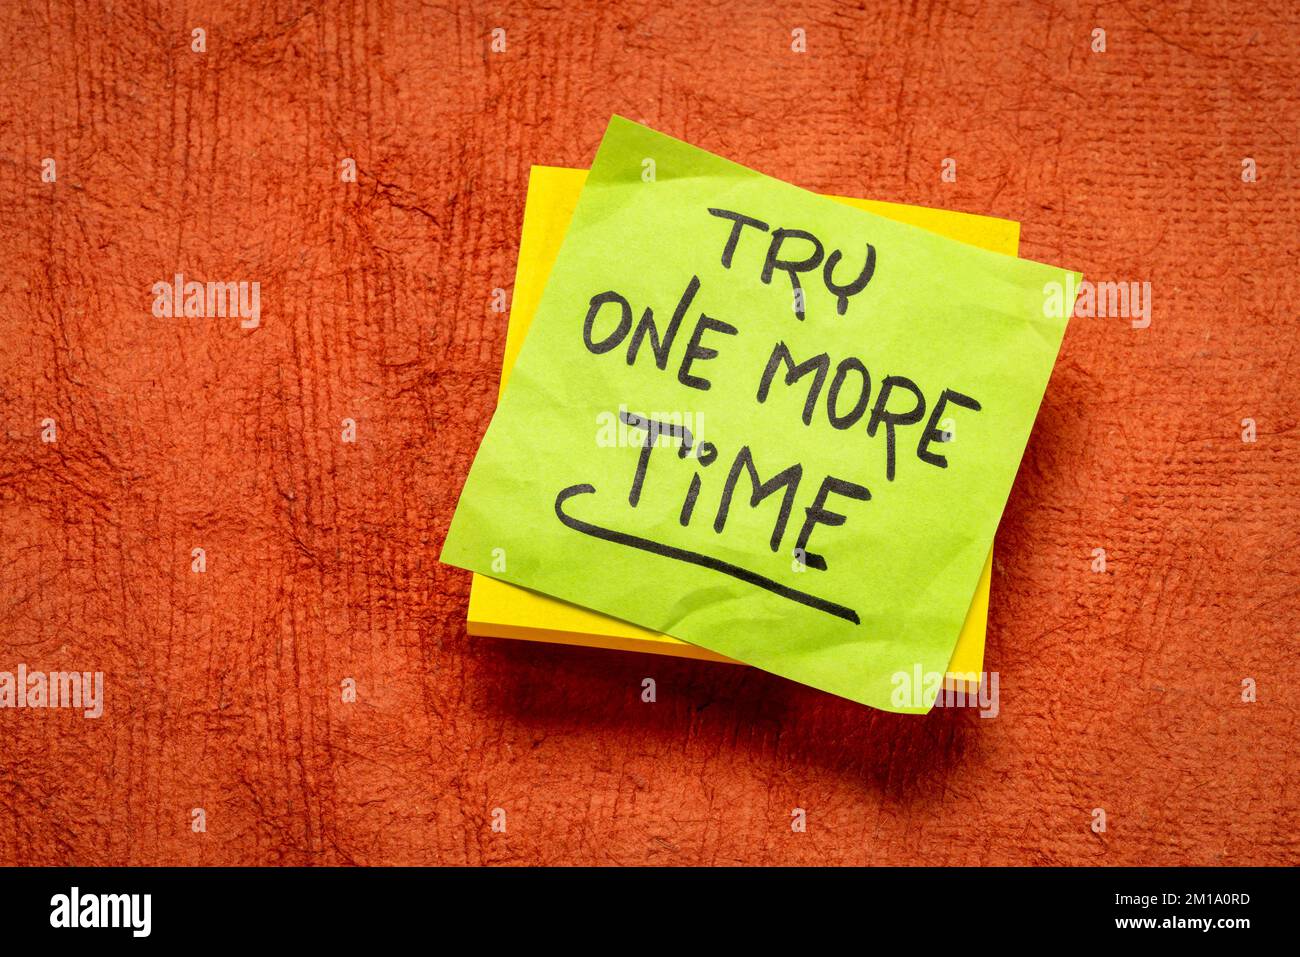 try one more time - handwritten motivational note, determination, persistence and encouragement concept Stock Photo